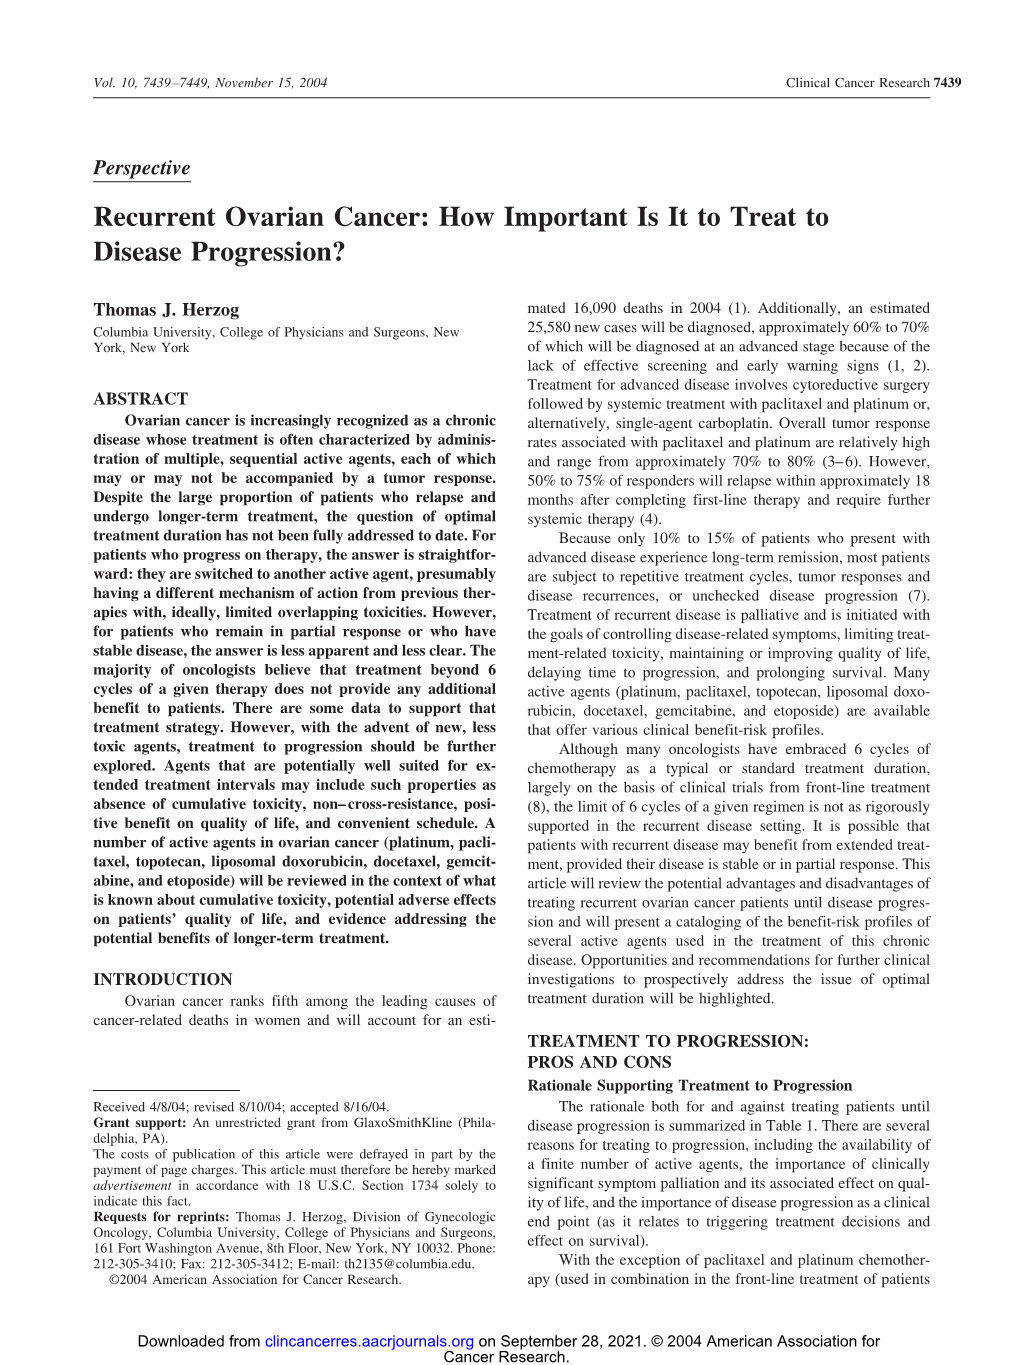 Recurrent Ovarian Cancer: How Important Is It to Treat to Disease Progression?